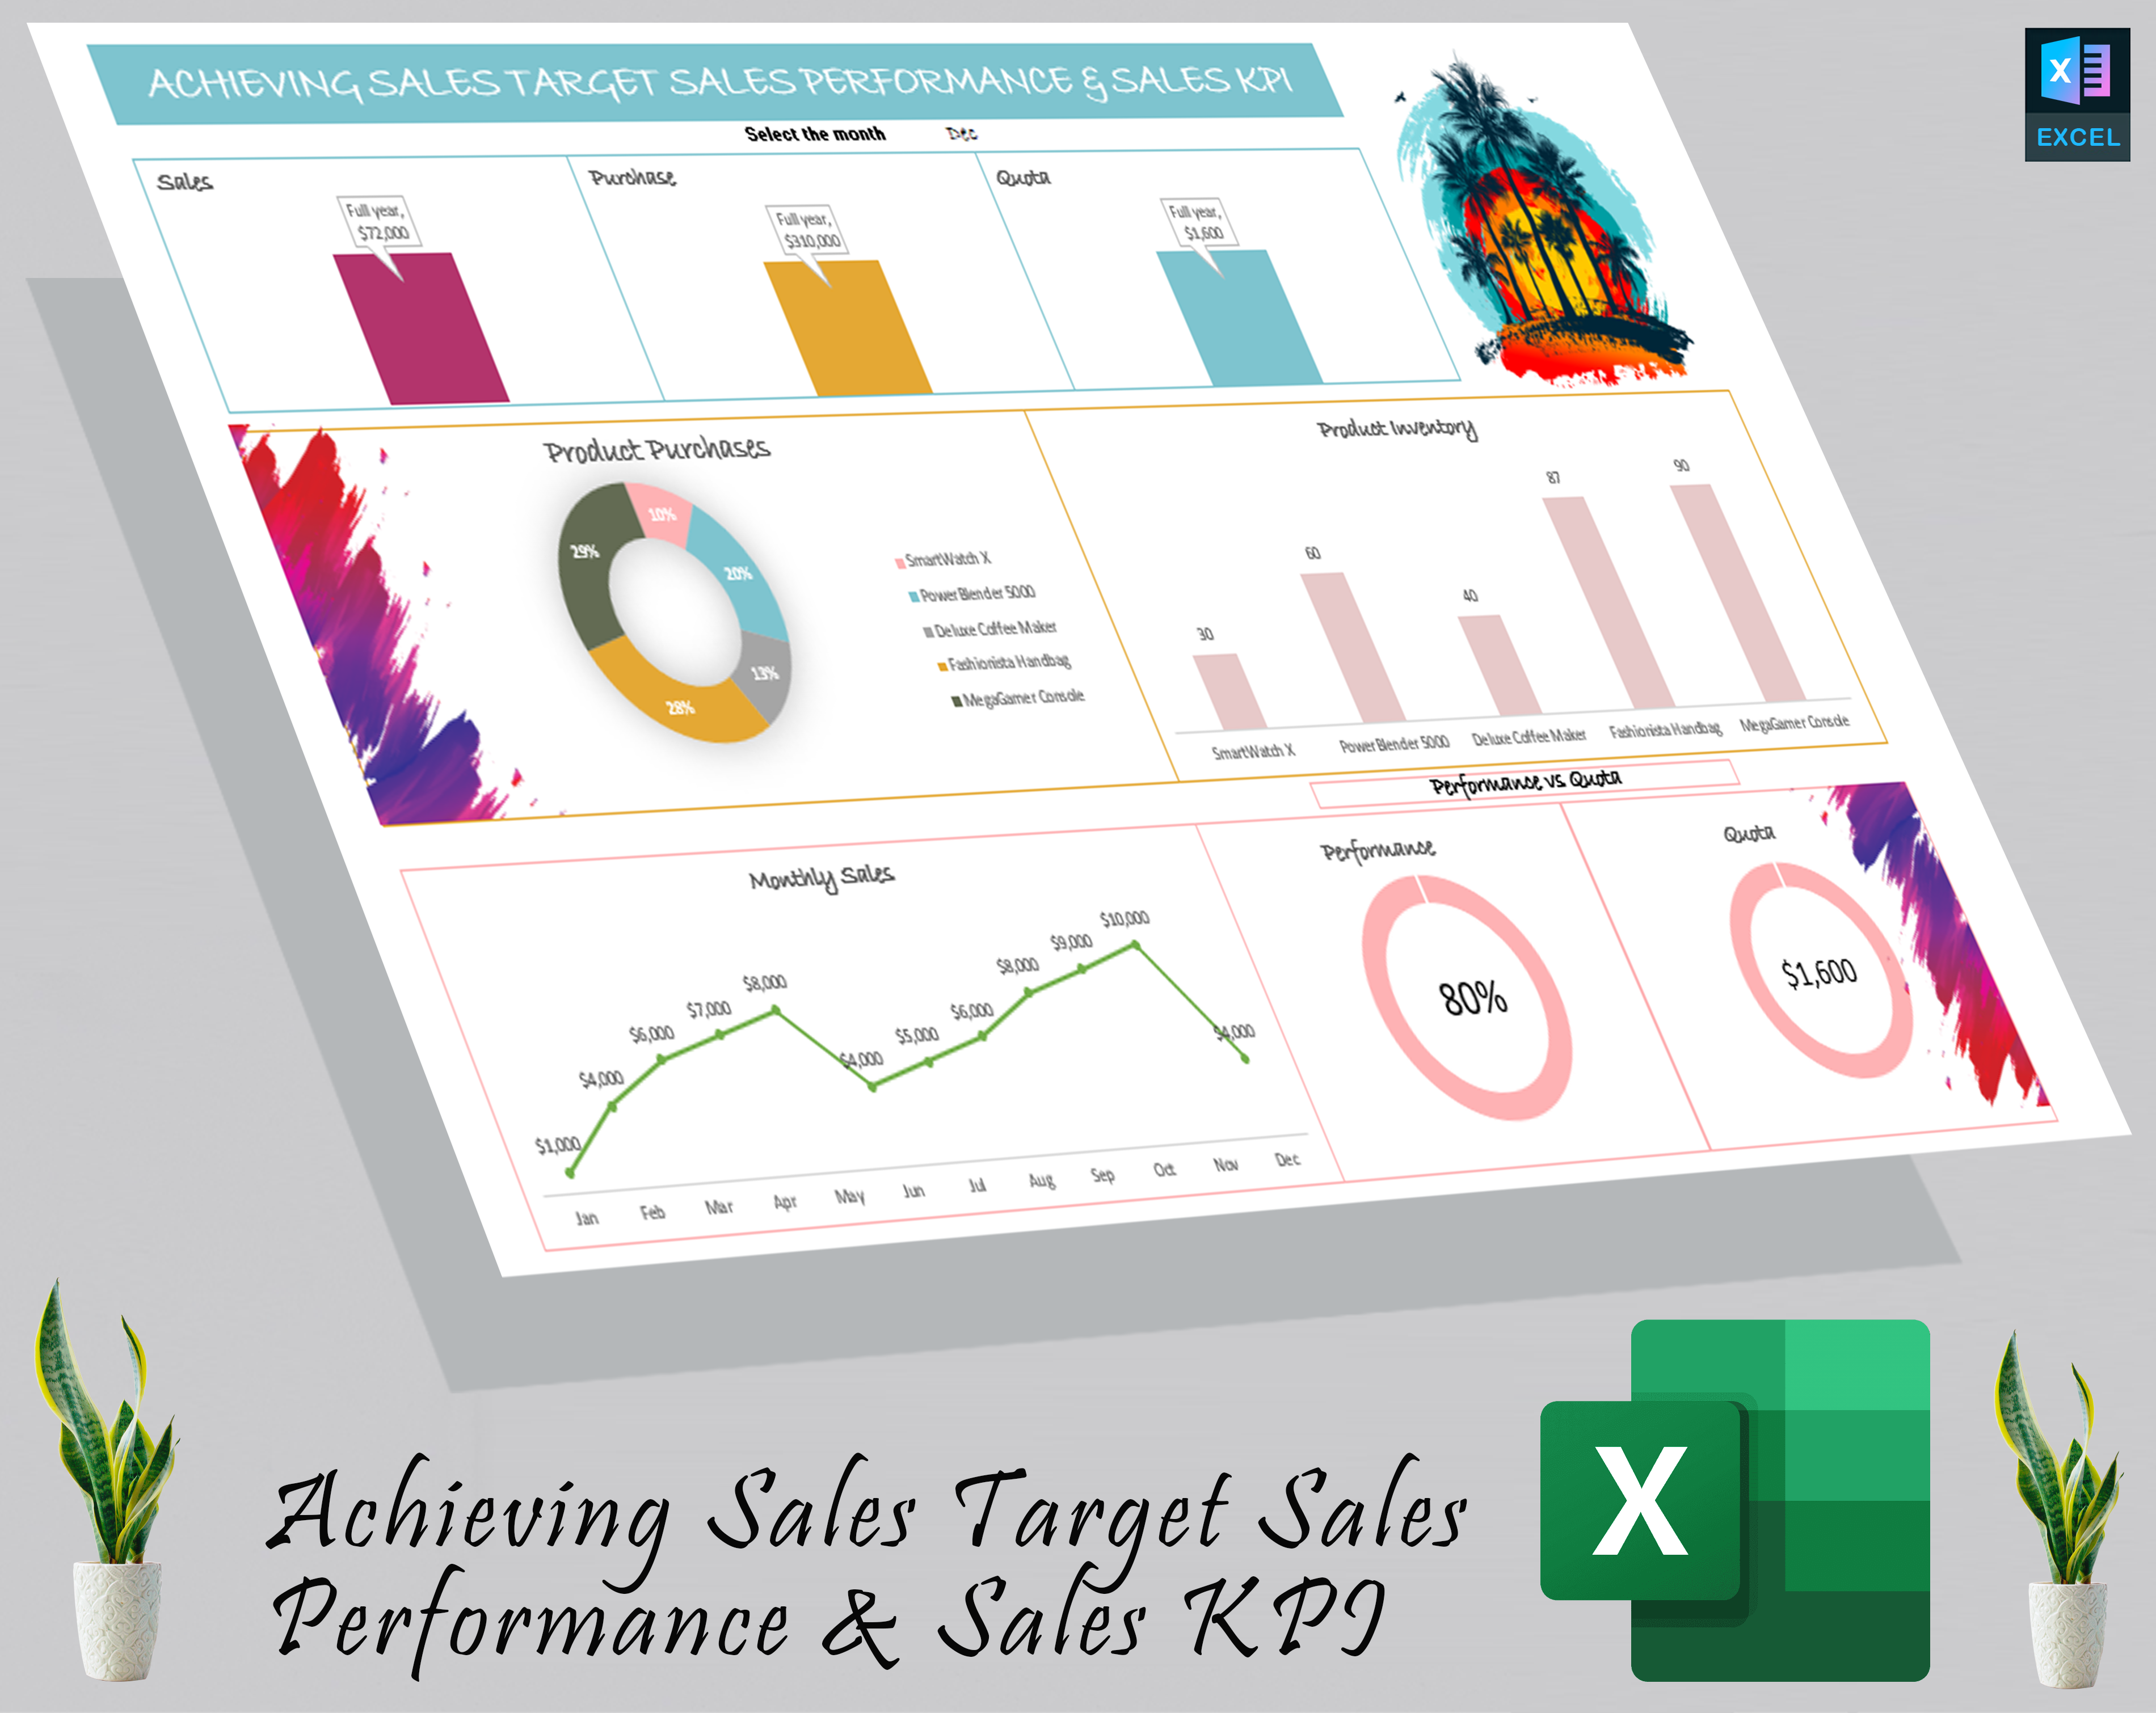 Achiveing sales target and sales performance and sales KPI